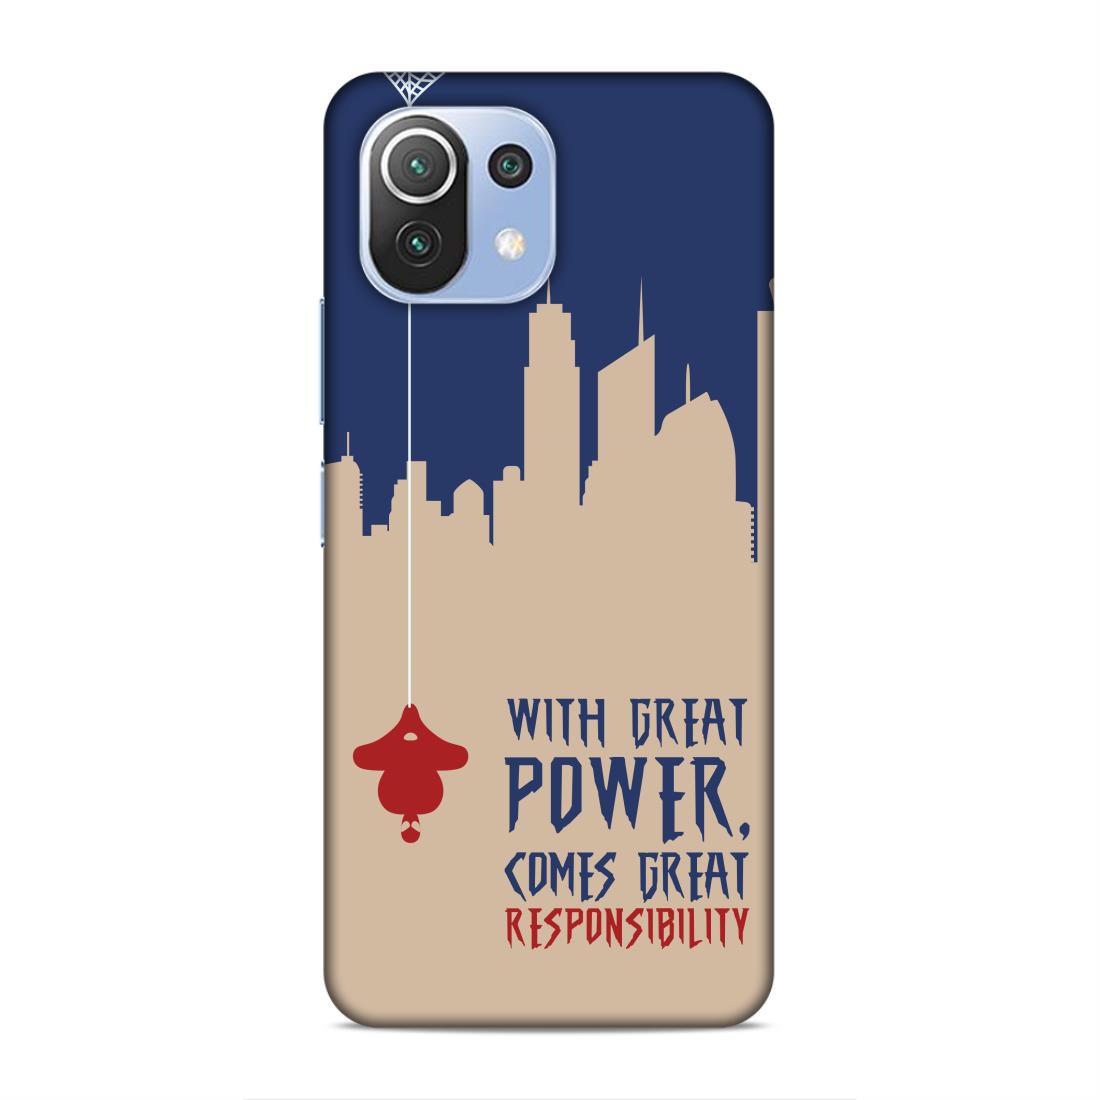 Great Power Comes Great Responsibility Hard Back Case For Xiaomi Mi 11 Lite